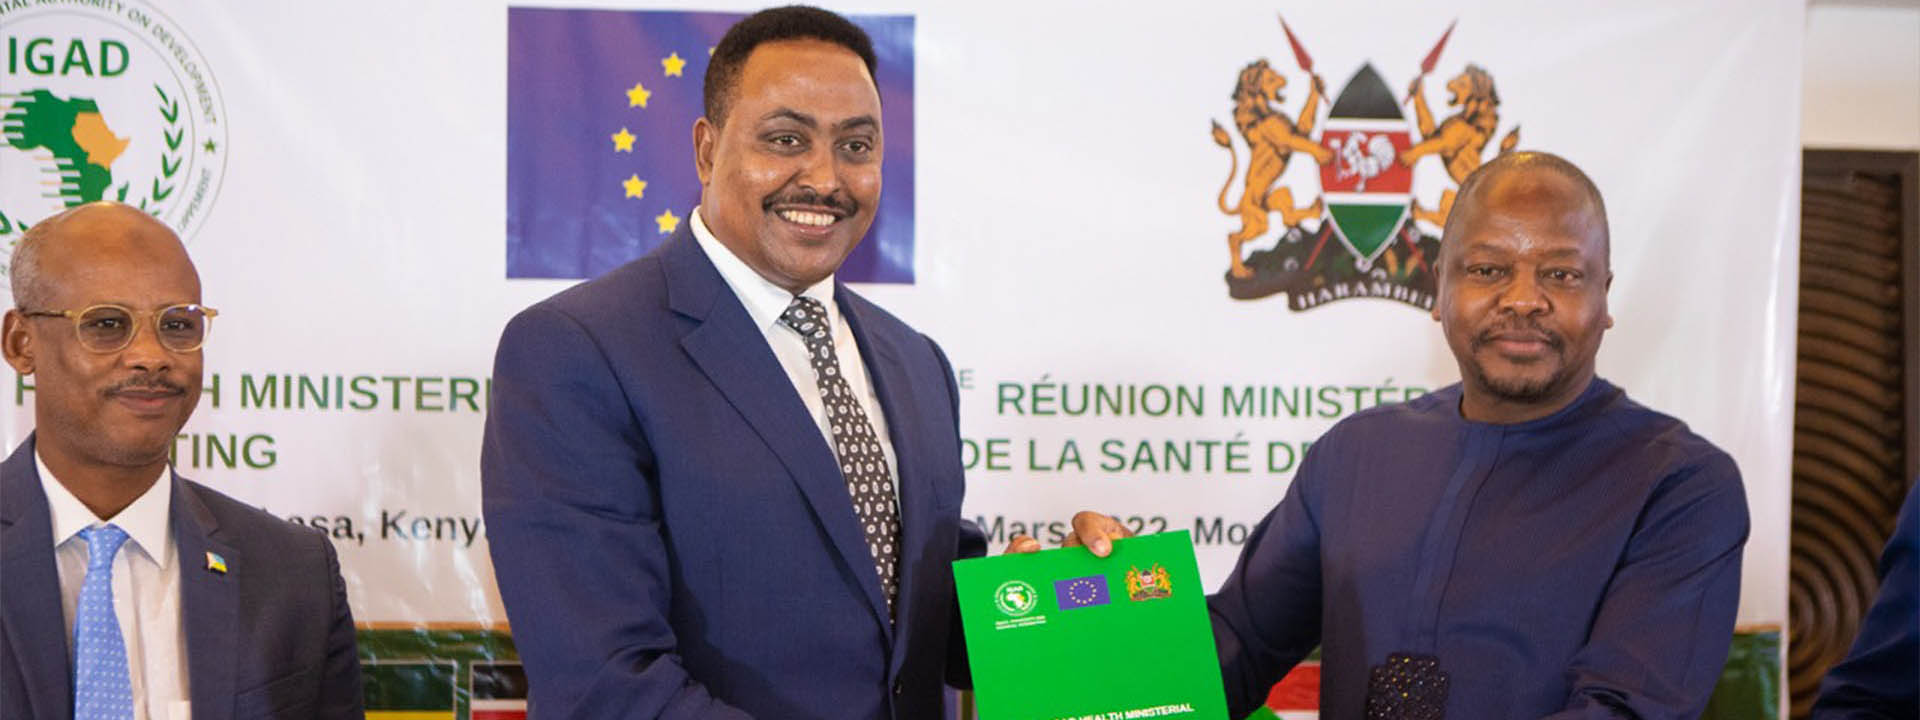 IGAD Health Ministers Commit to Scale up Health Services for Refugees and Cross Borders